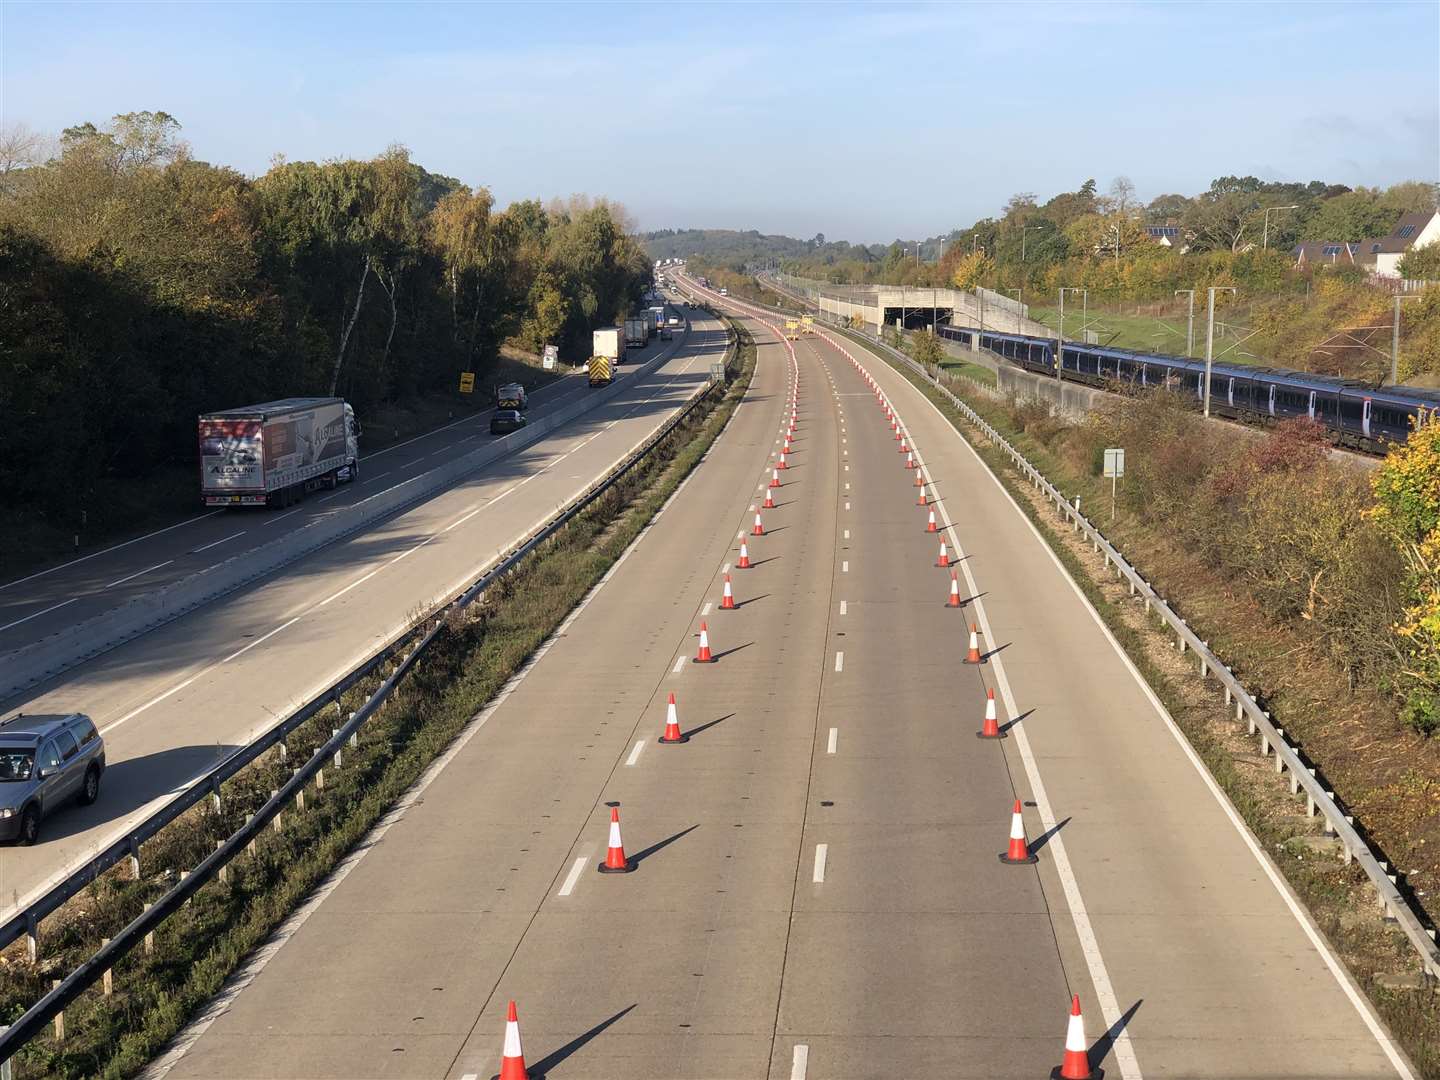 The scheme came into force on the M20 on Monday morning